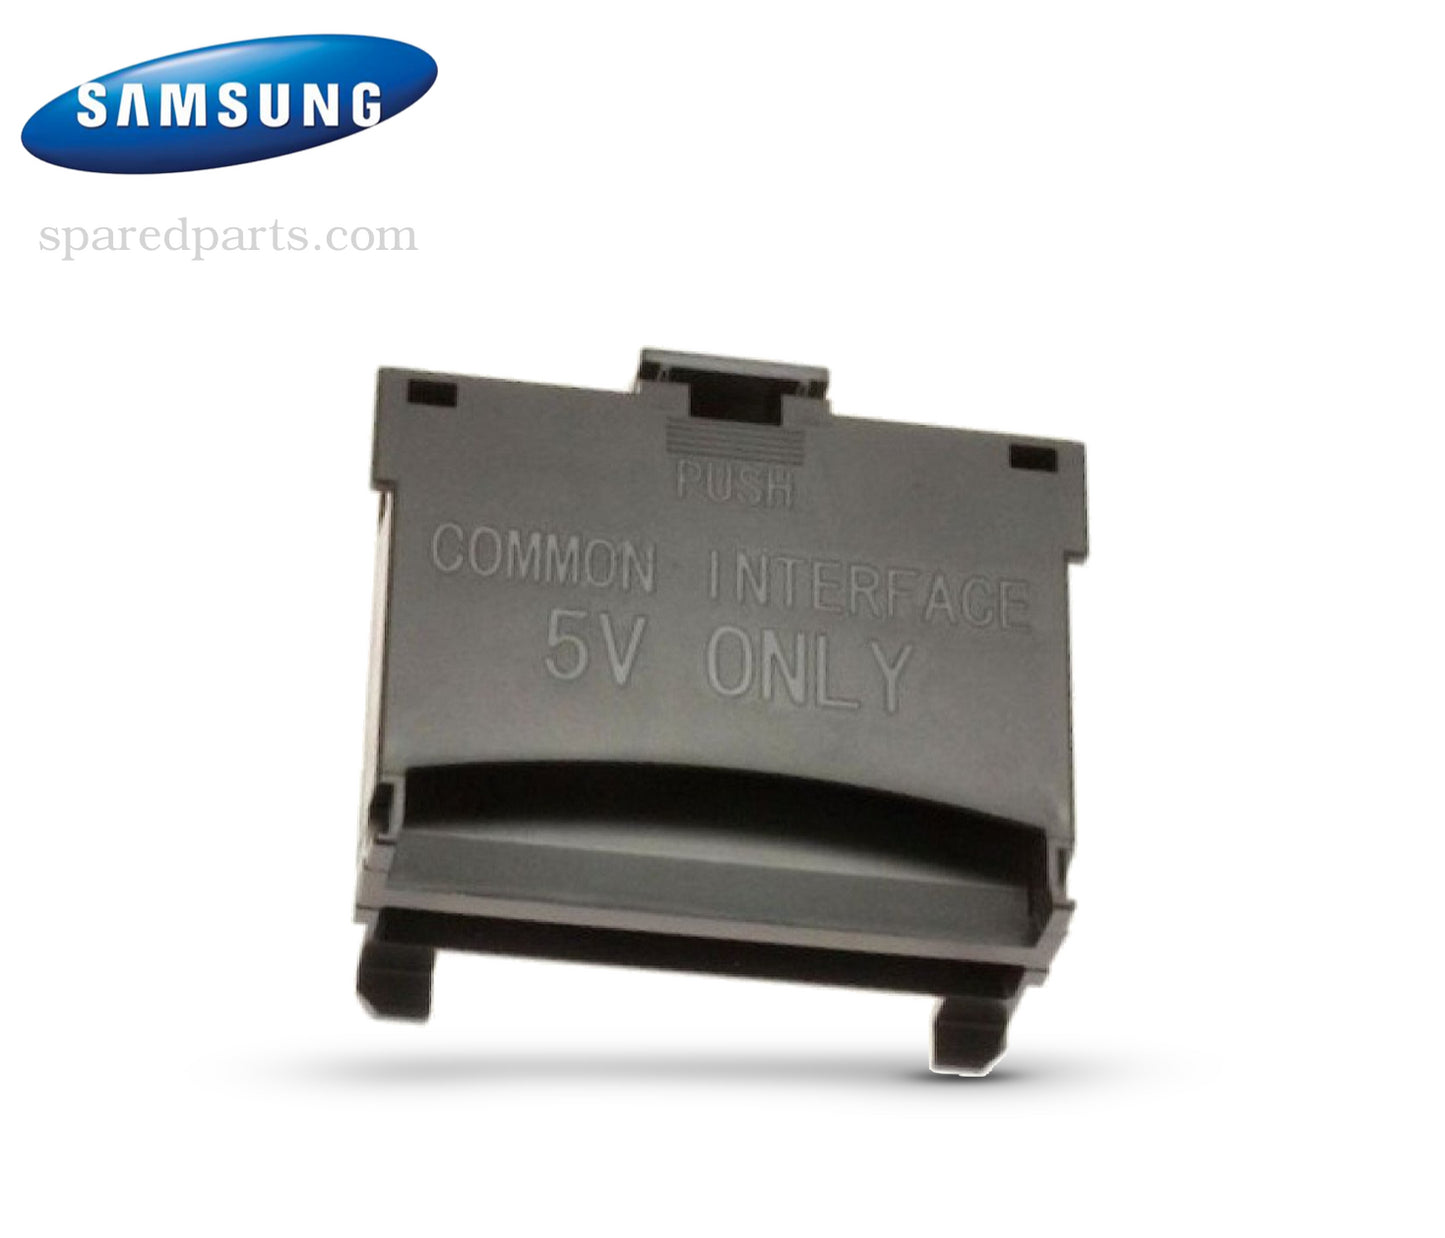 Samsung 3709-001791 Common Interface Connector Card